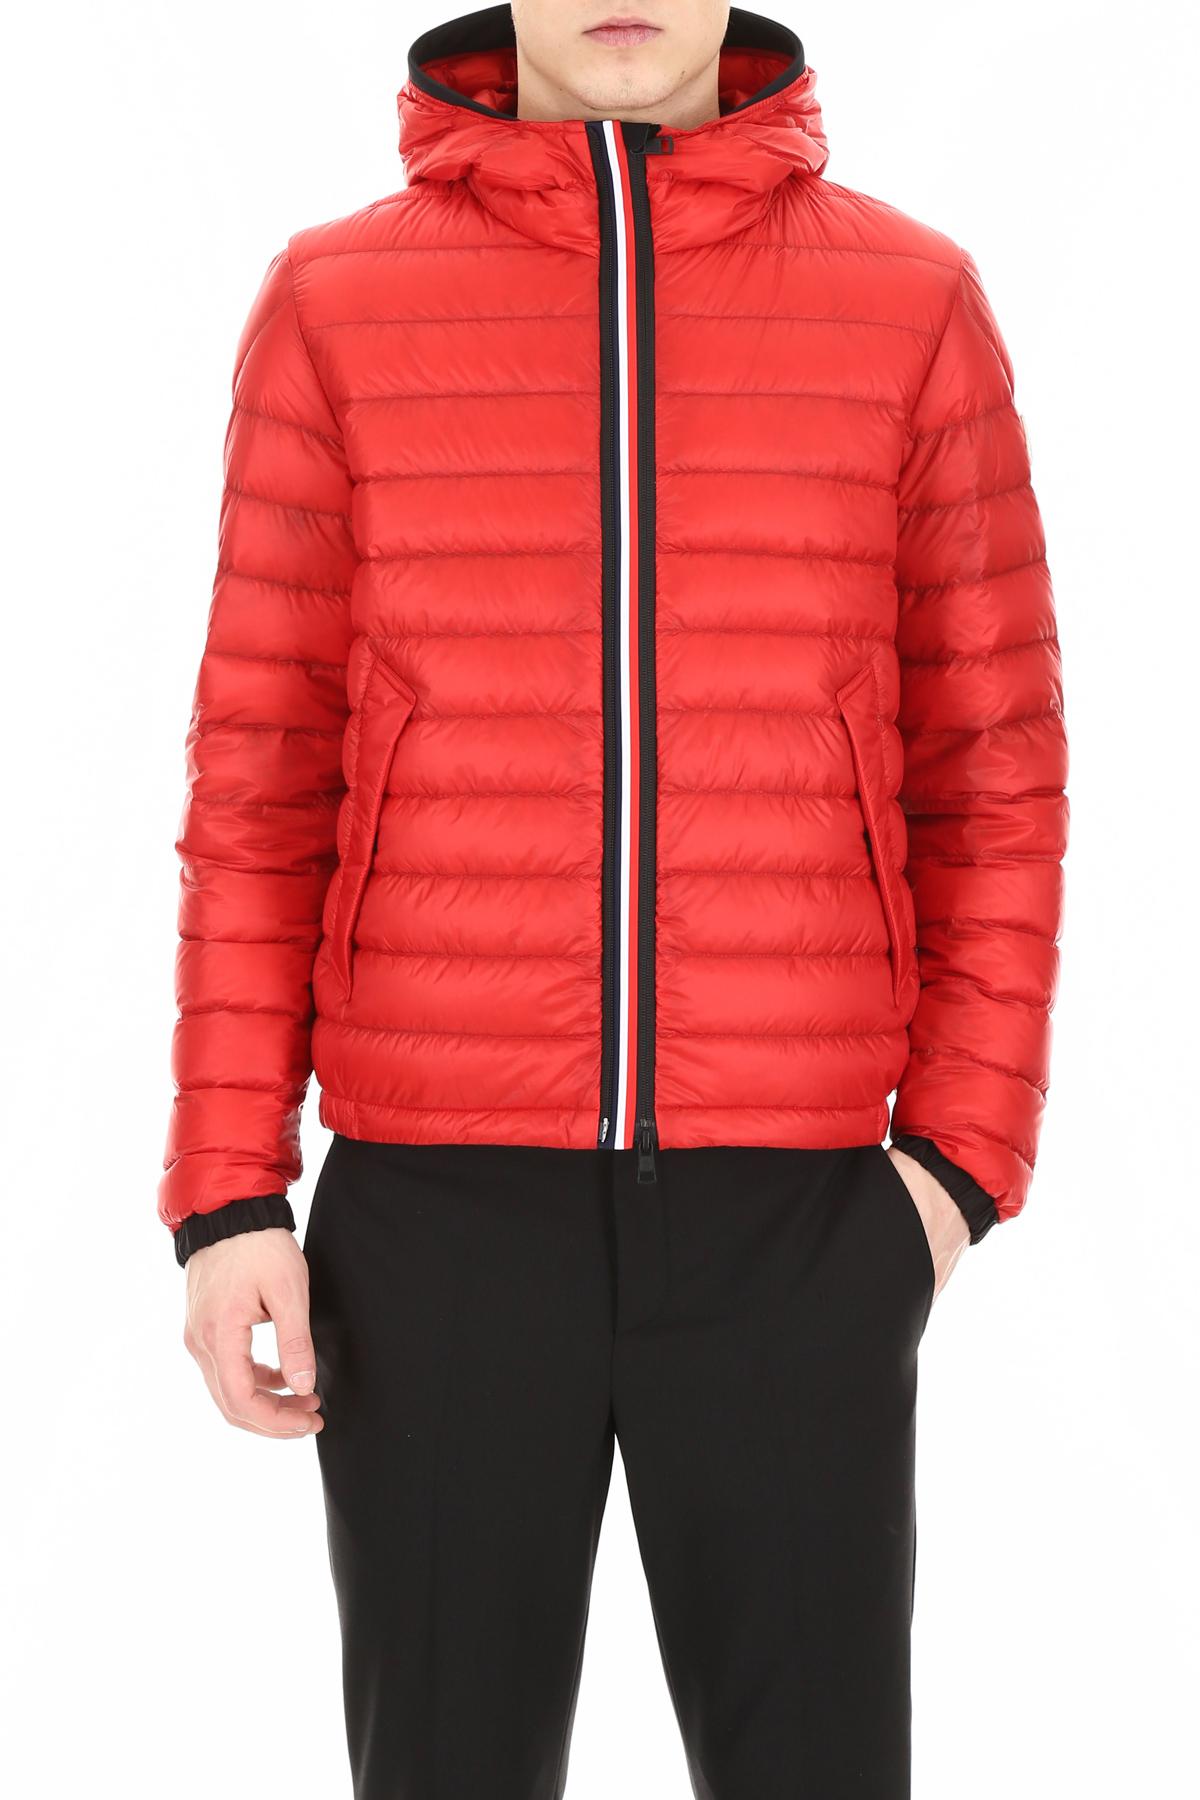 Moncler Synthetic Longue Saison Morvan Jacket in Red for Men - Lyst